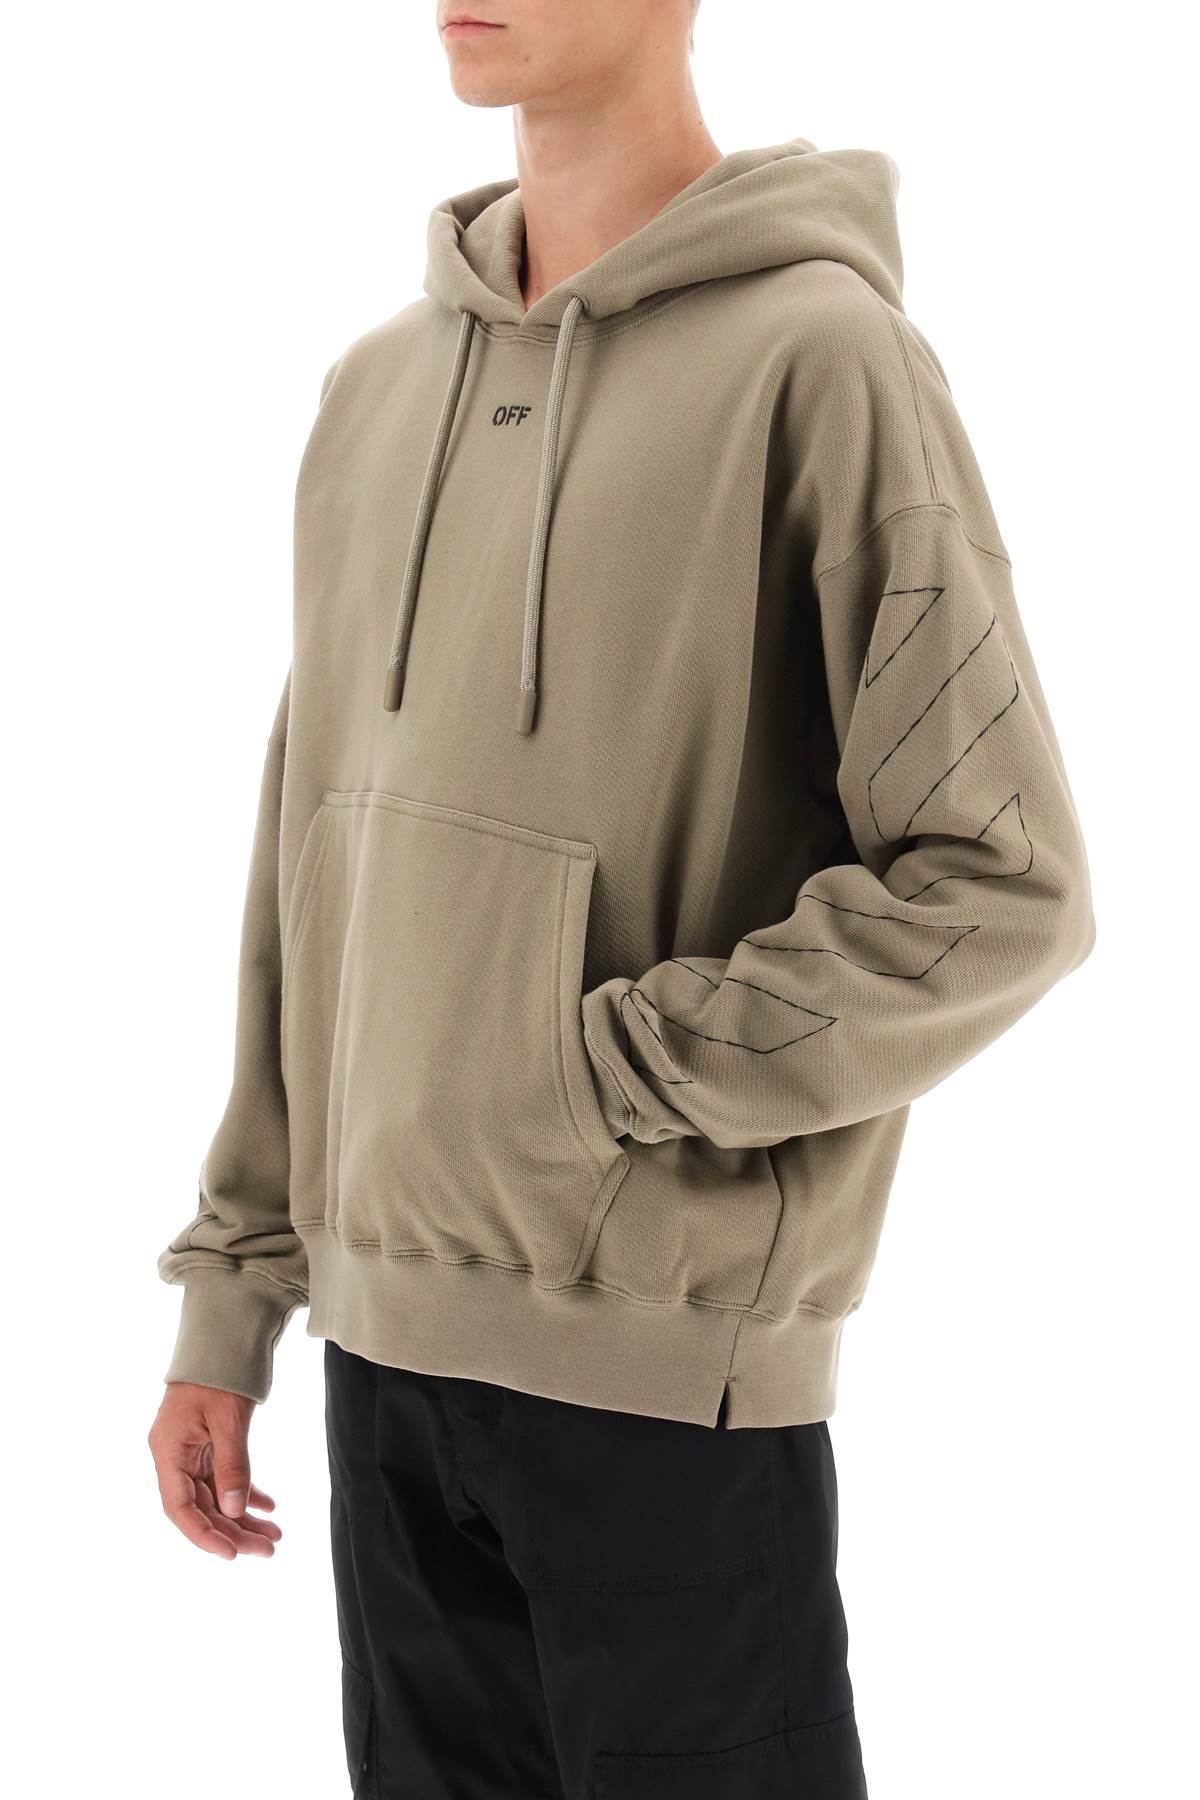 Off-White Off-white hoodie with topstitched motifs